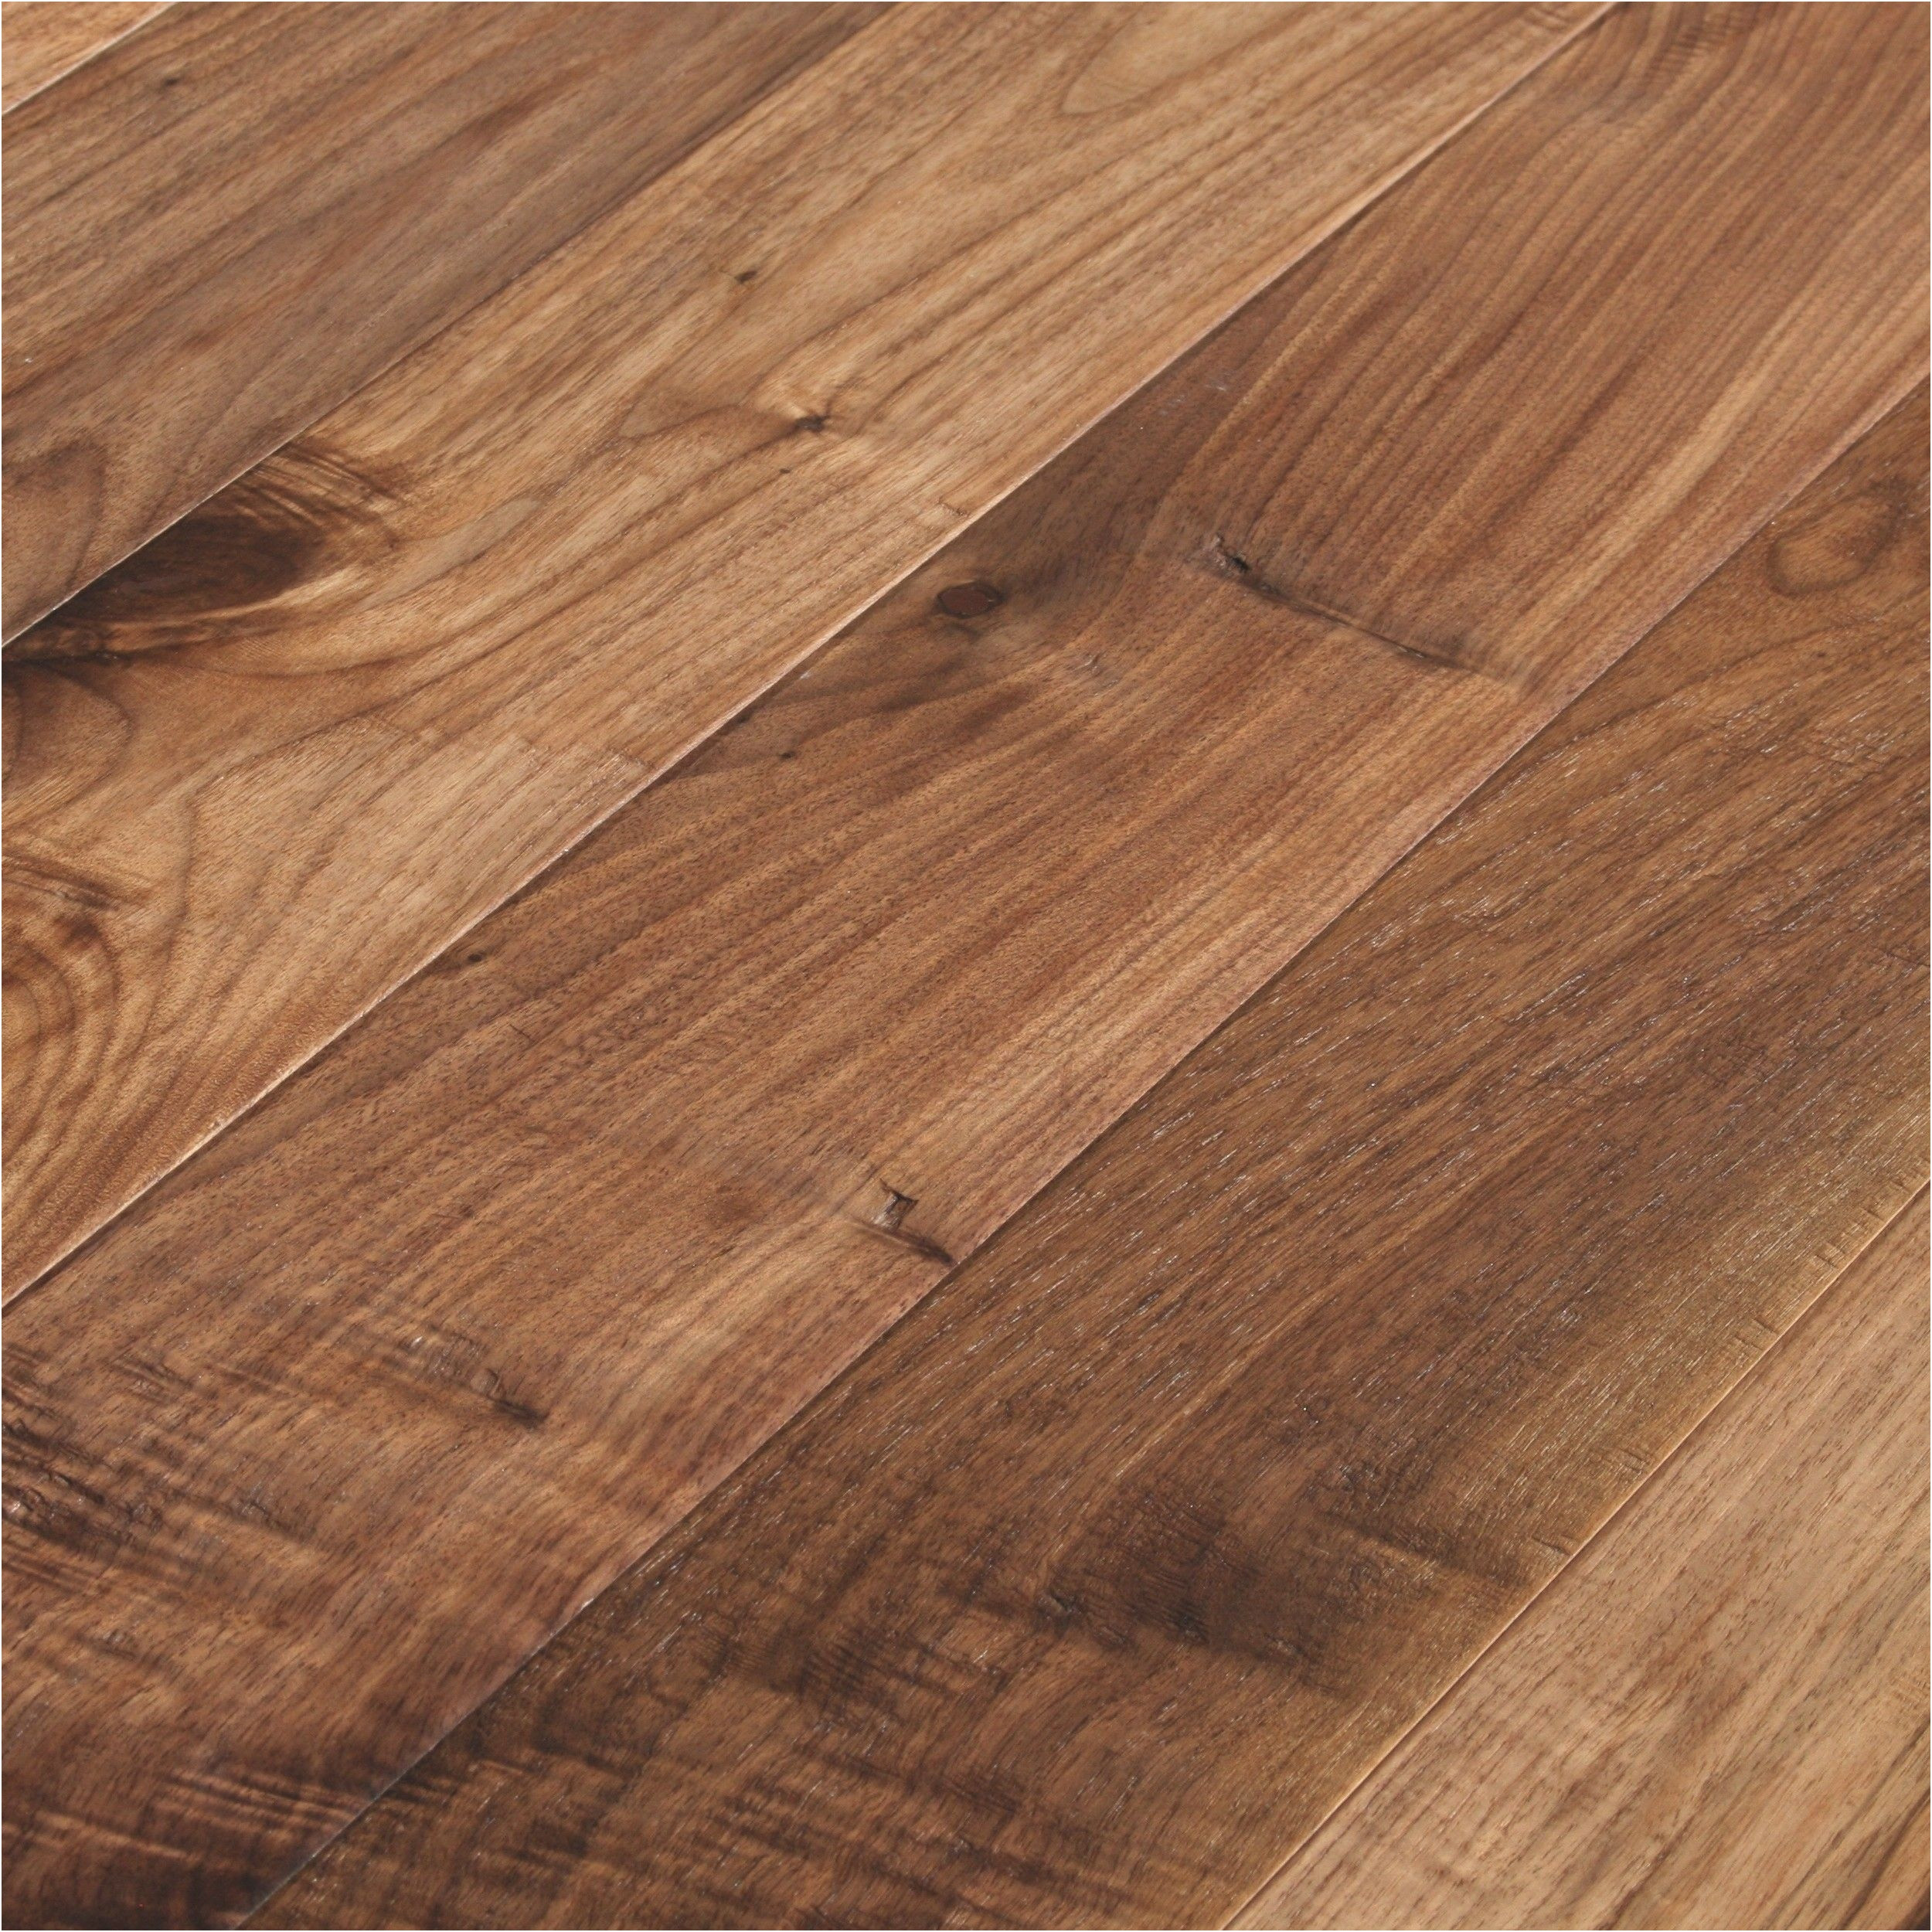 16 Ideal Prefinished Hardwood Flooring Cost Per Square Foot 2024 free download prefinished hardwood flooring cost per square foot of how to install prefinished hardwood flooring on concrete new regarding how to install prefinished hardwood flooring on concrete new mill